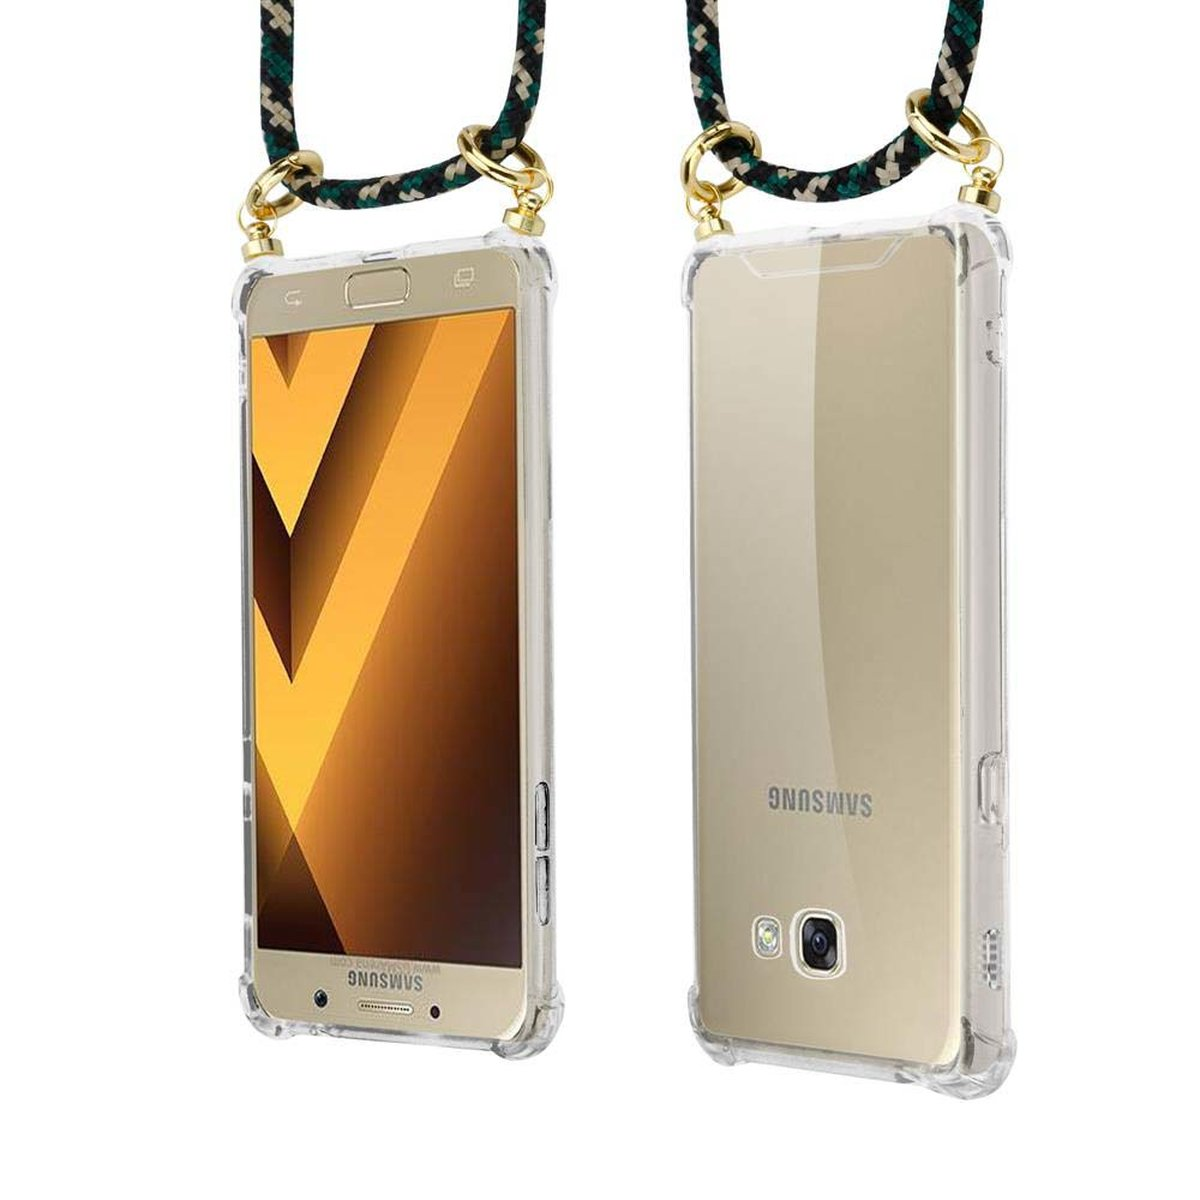 Backcover, Band Kette mit abnehmbarer Kordel CADORABO Galaxy und 2017, Ringen, Hülle, Handy Samsung, Gold A5 CAMOUFLAGE